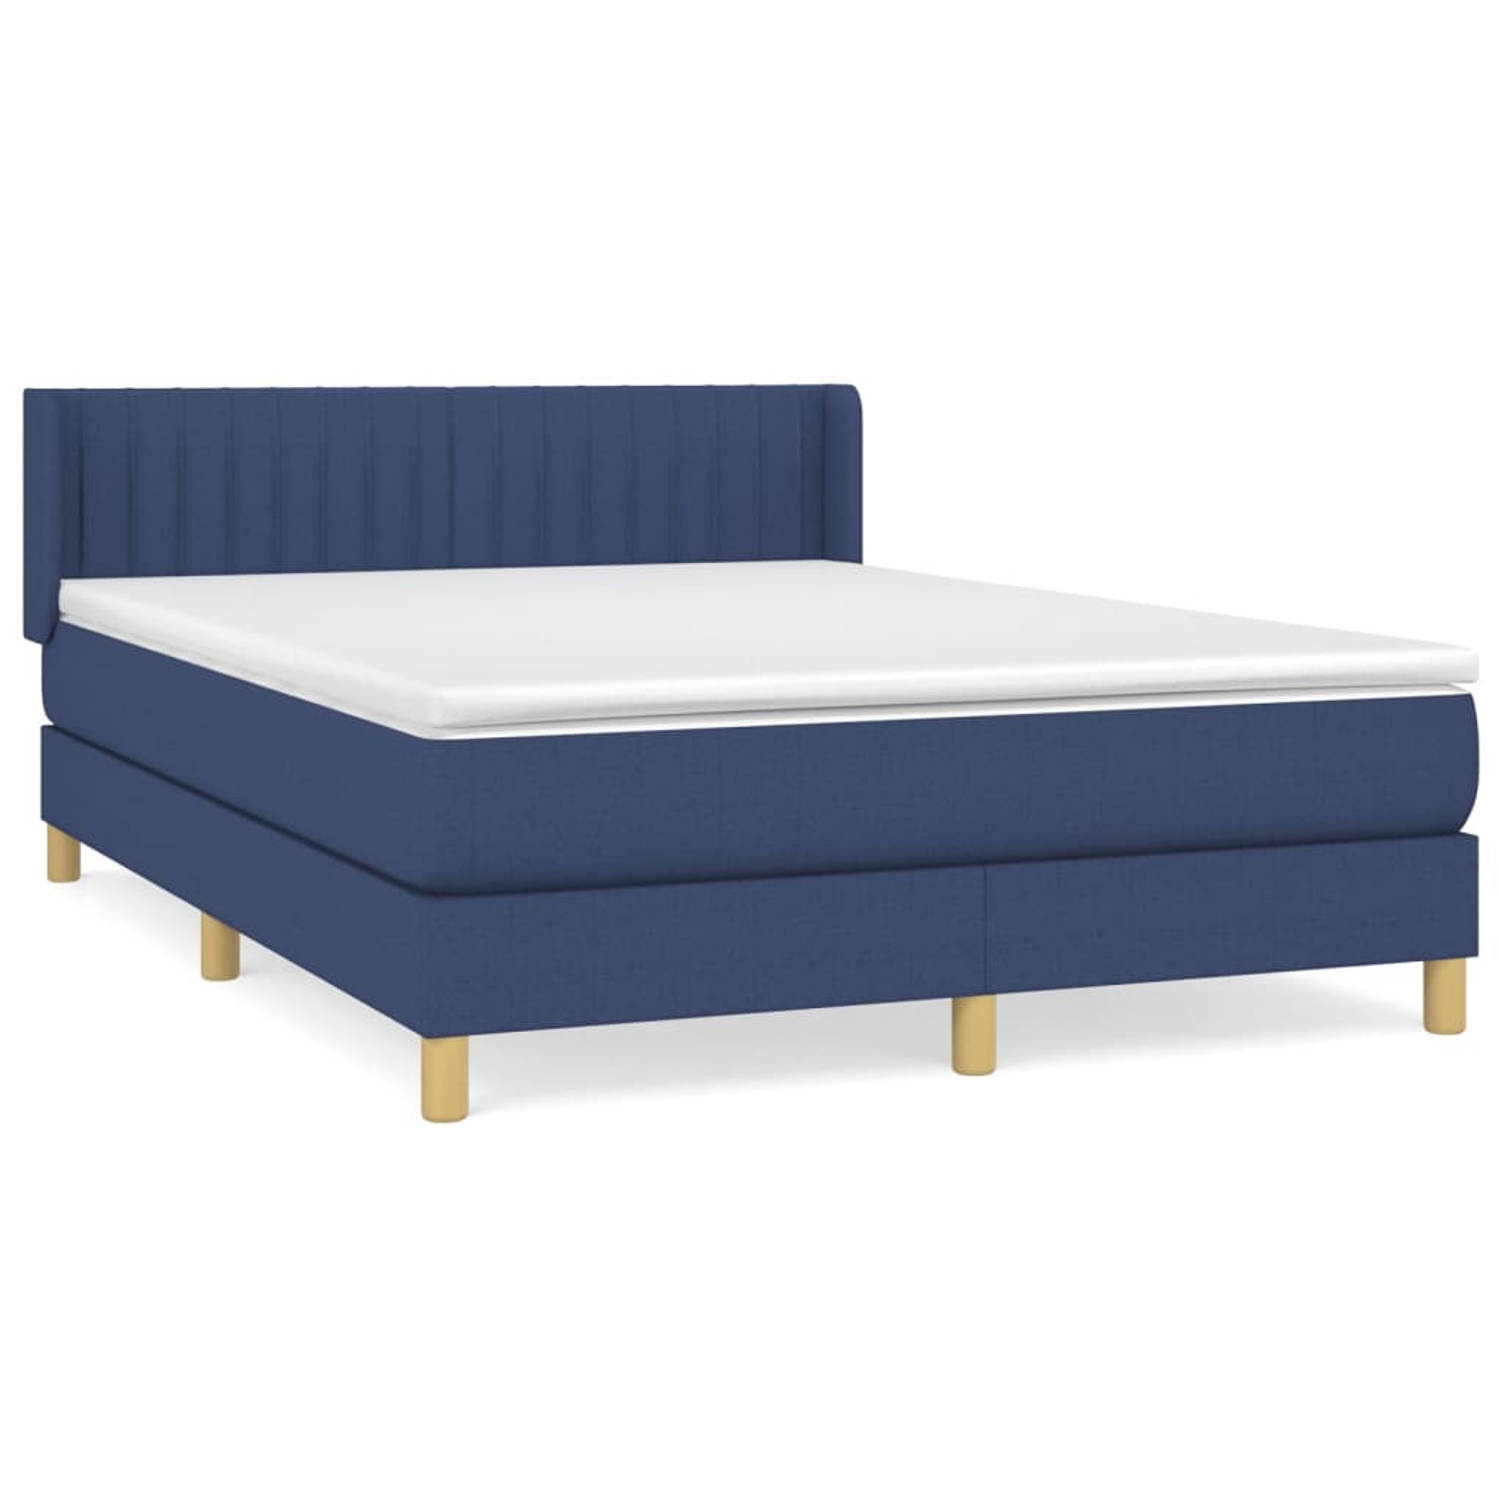 The Living Store Boxspring Bed - Comfort Sleep - Bed - 193 x 147 x 78/88 cm - Blauw - Stof